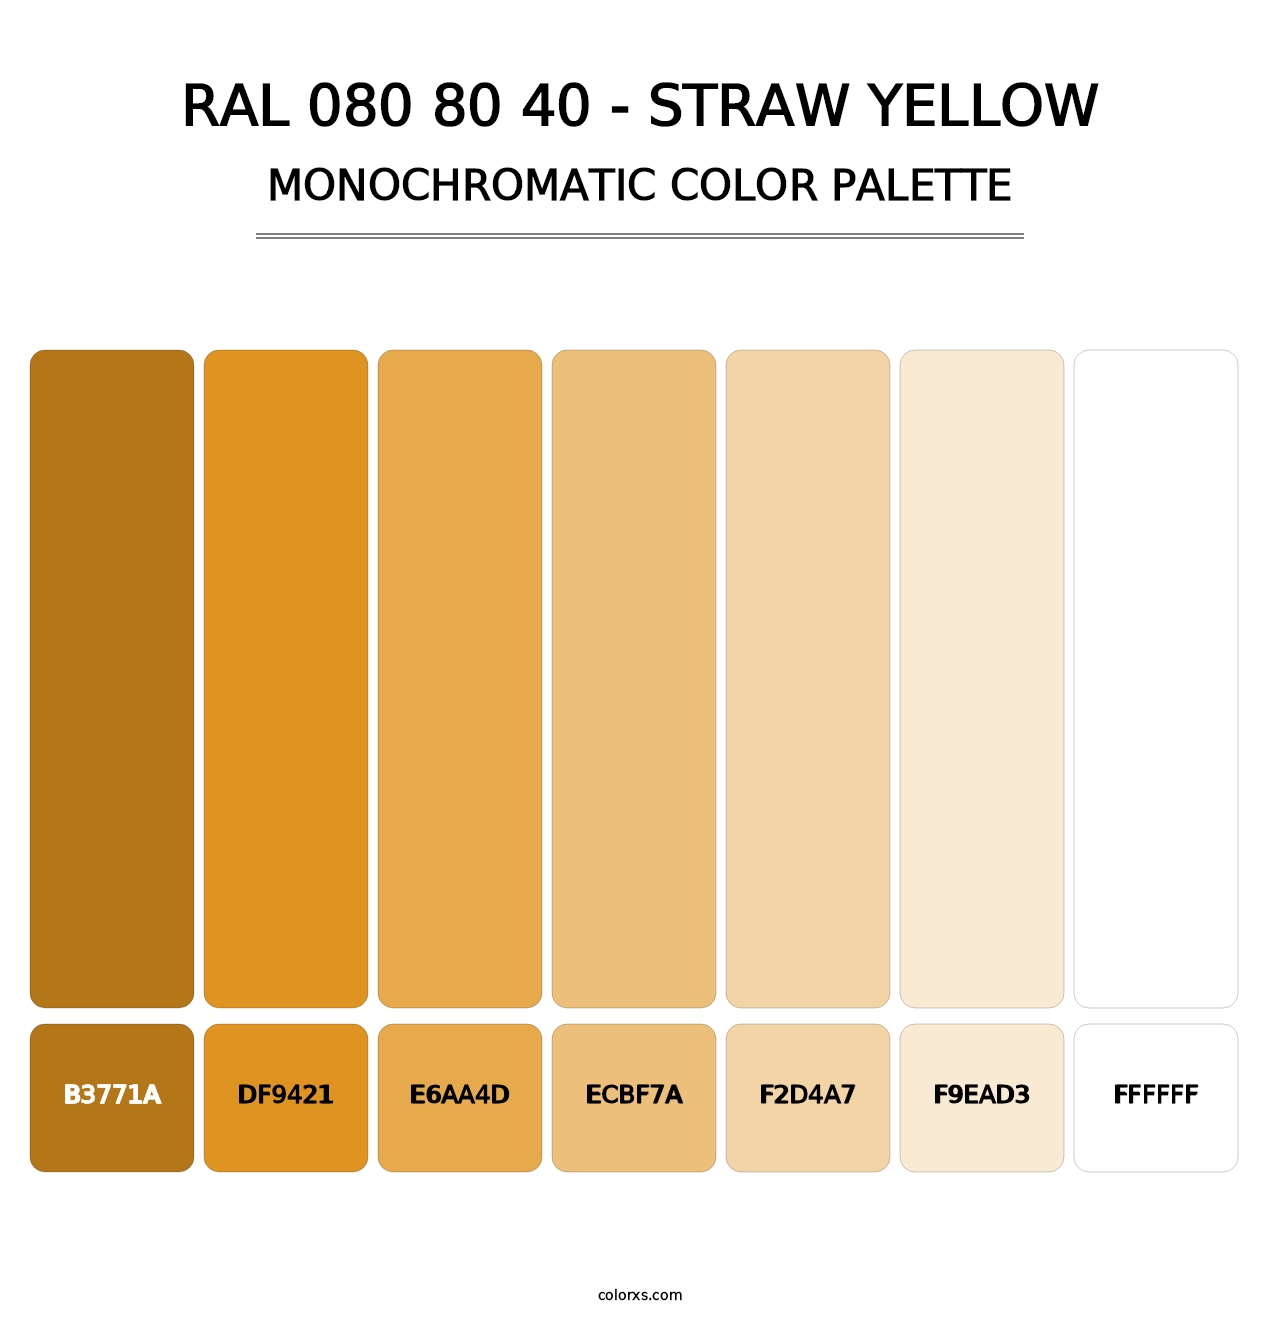 RAL 080 80 40 - Straw Yellow - Monochromatic Color Palette